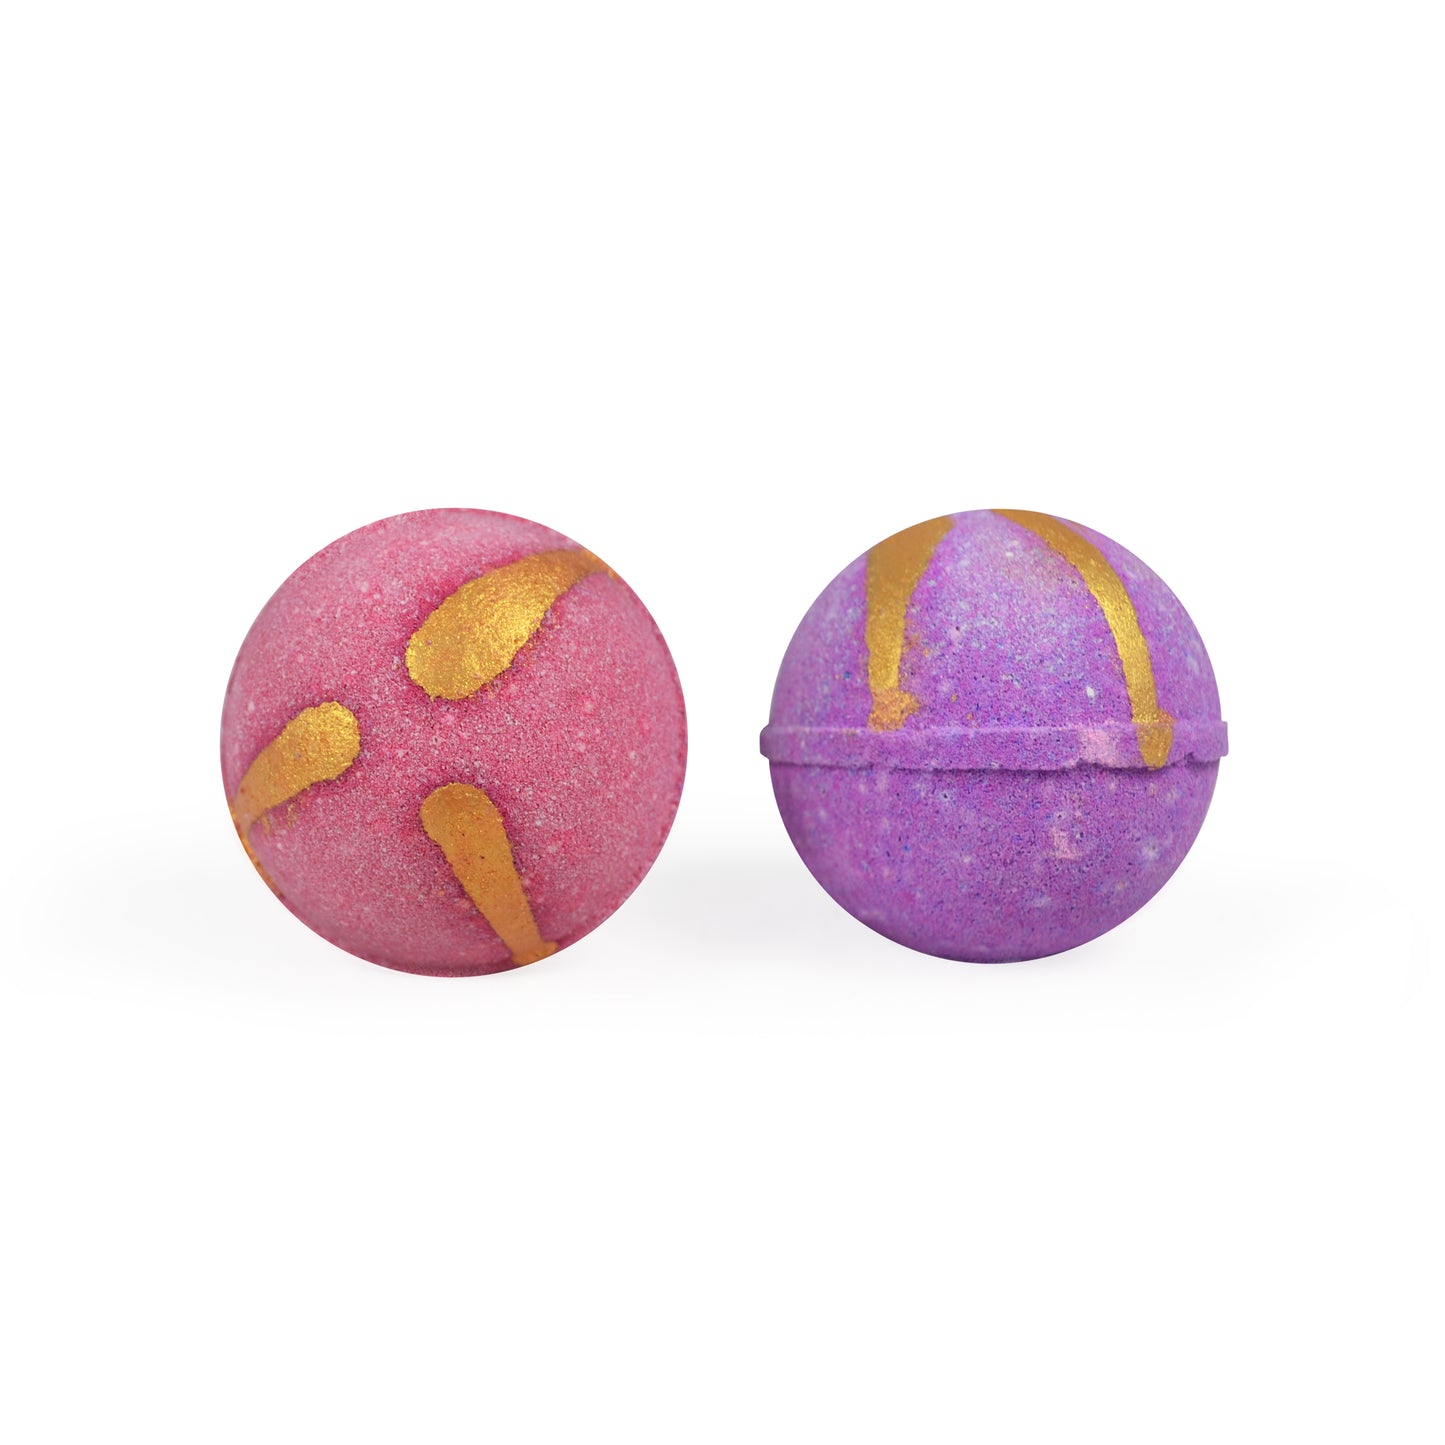 Round floral pastel bath bombs with Lilac, Musk, cherry blossom and red rose fragrances (65 gram each)